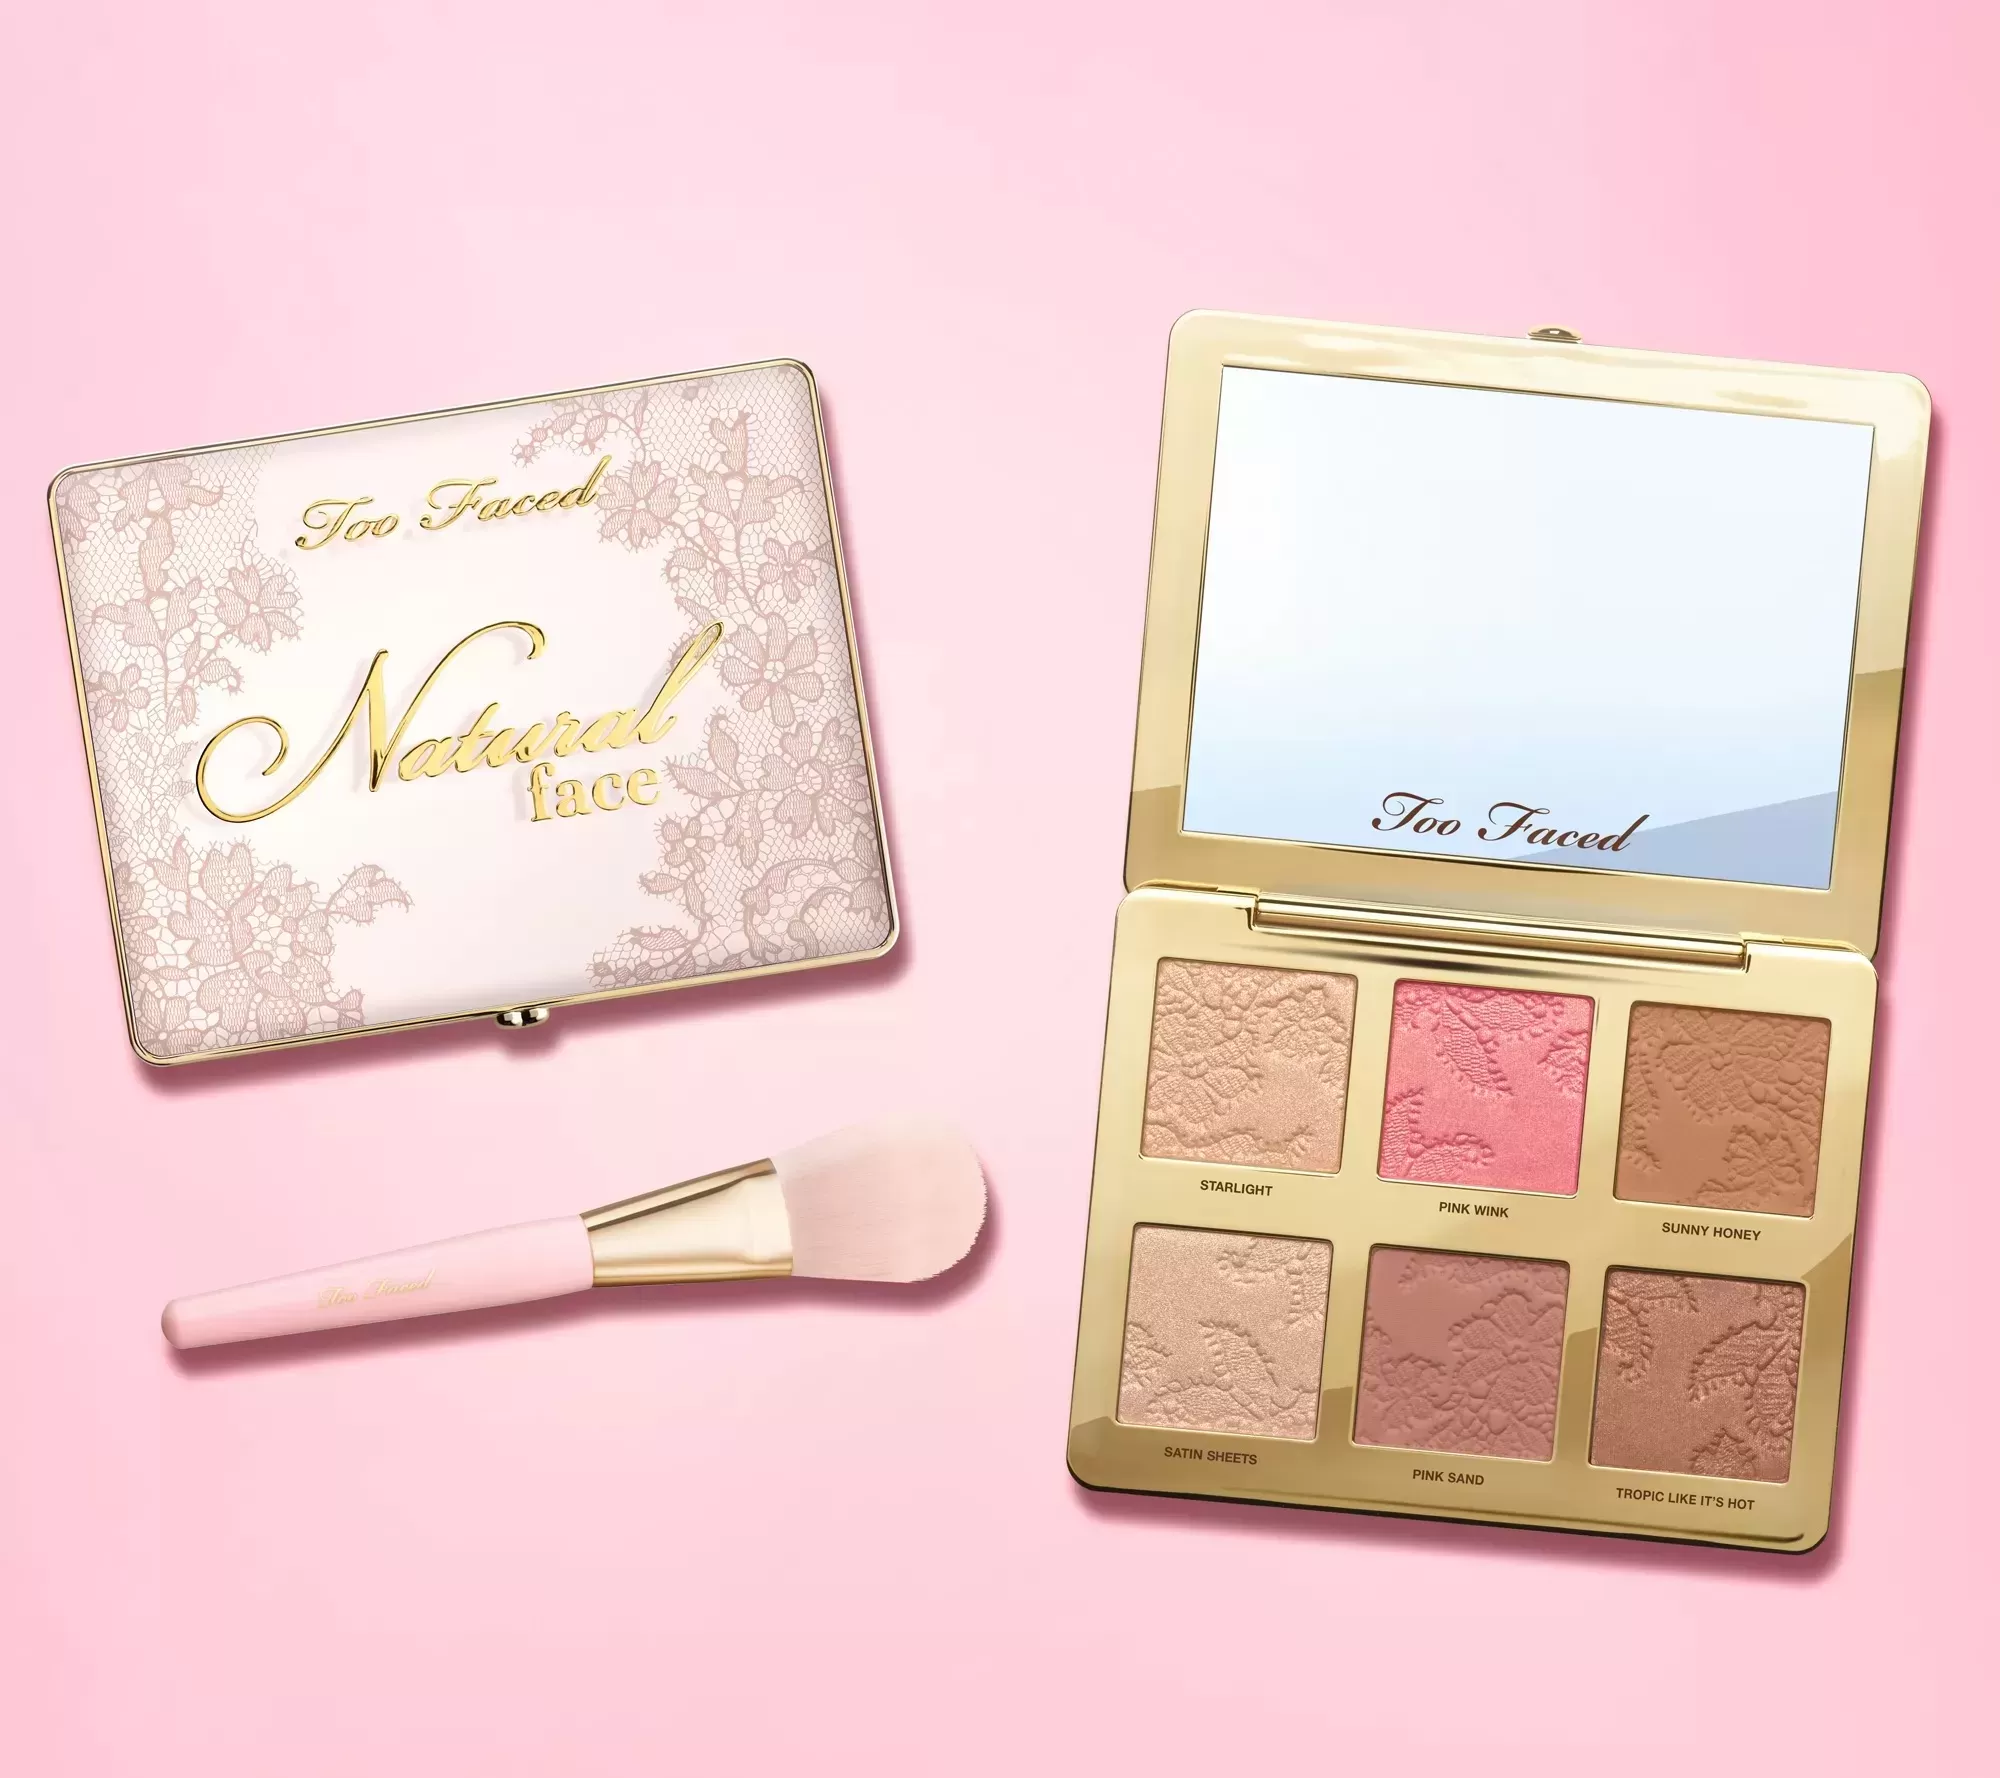 about Face palette Too Faced natural face palette